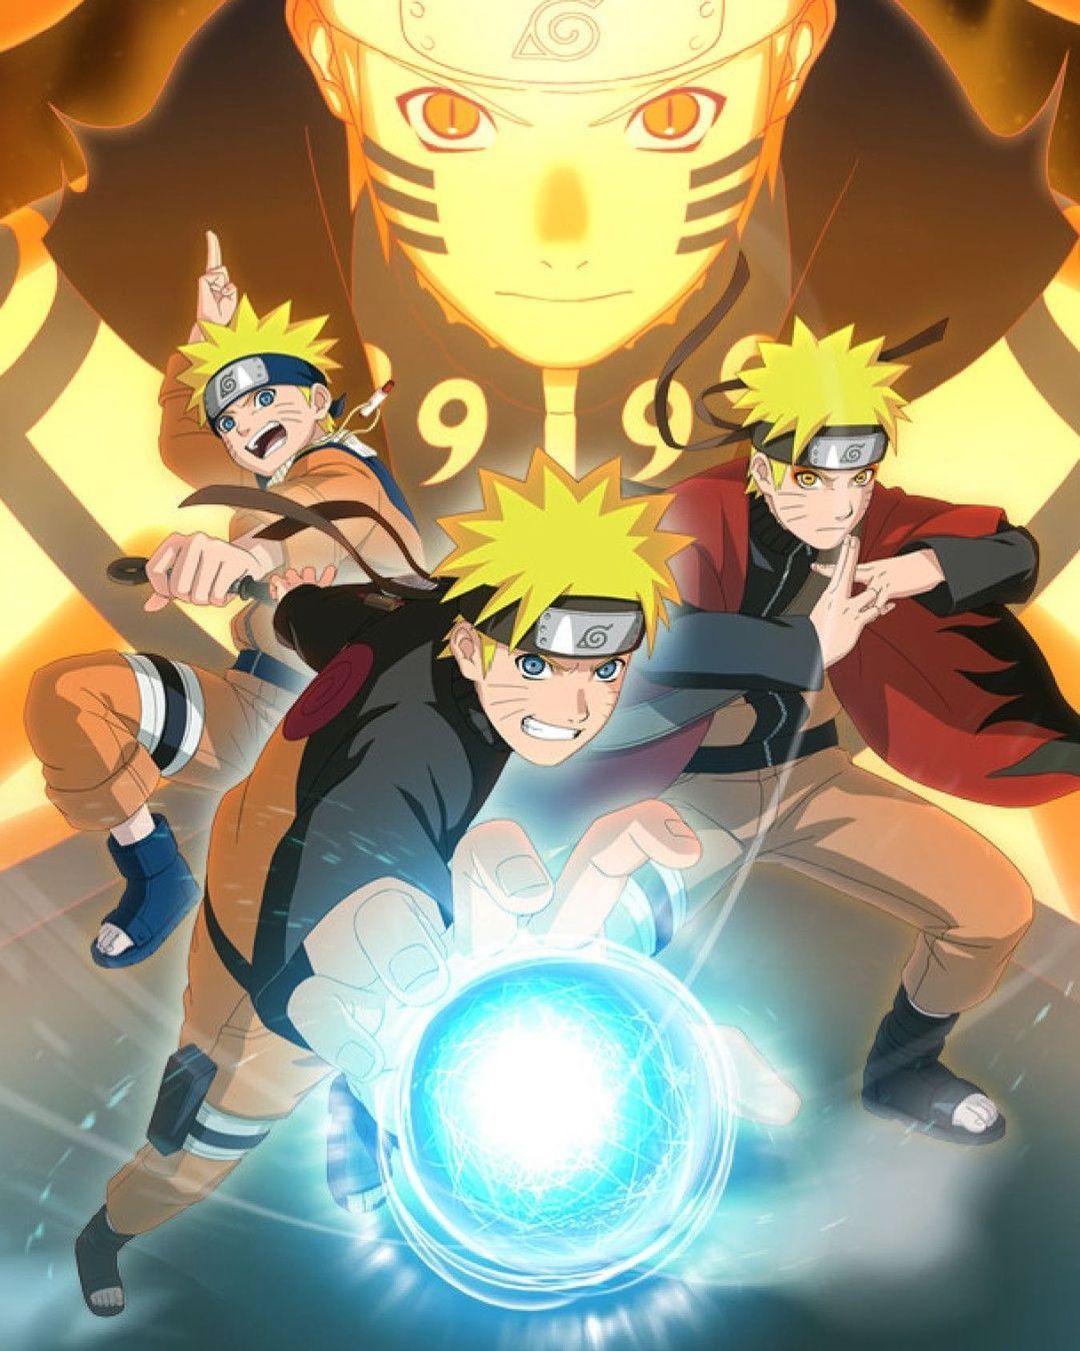 Cool NarutoWallpapers